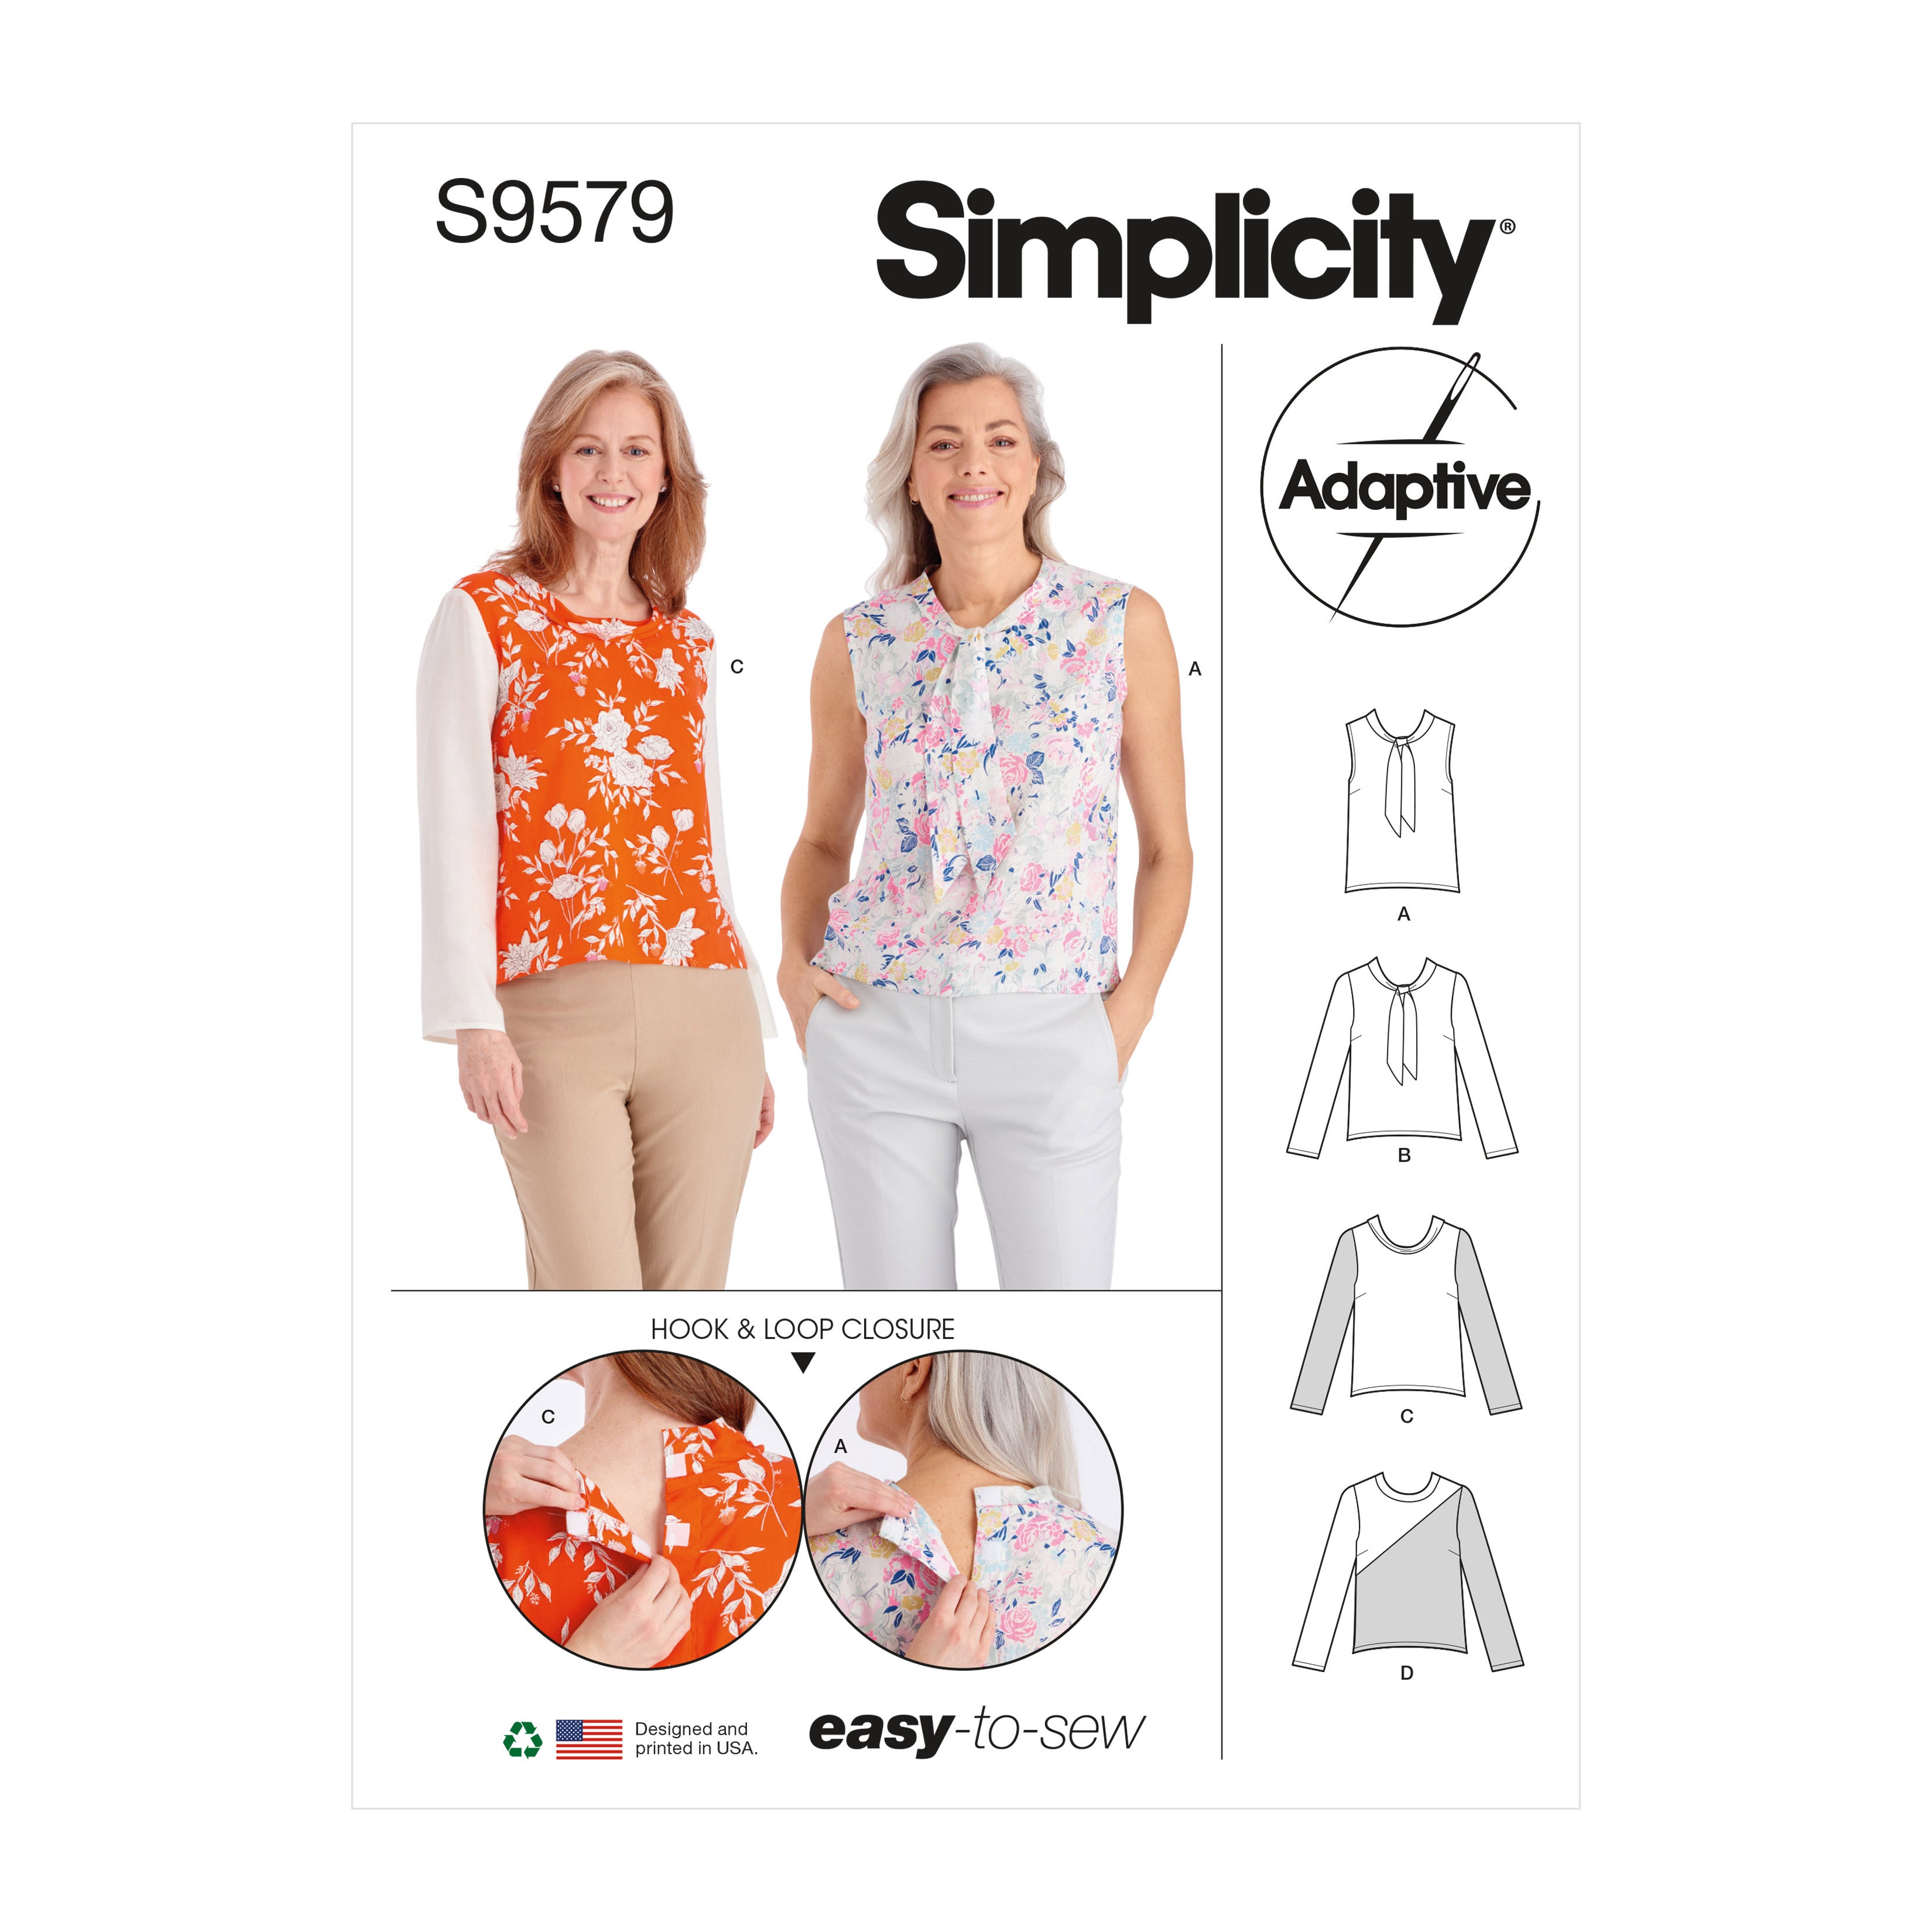 Simplicity Sewing Pattern 9579 Misses' Adaptive Tops from Jaycotts Sewing Supplies